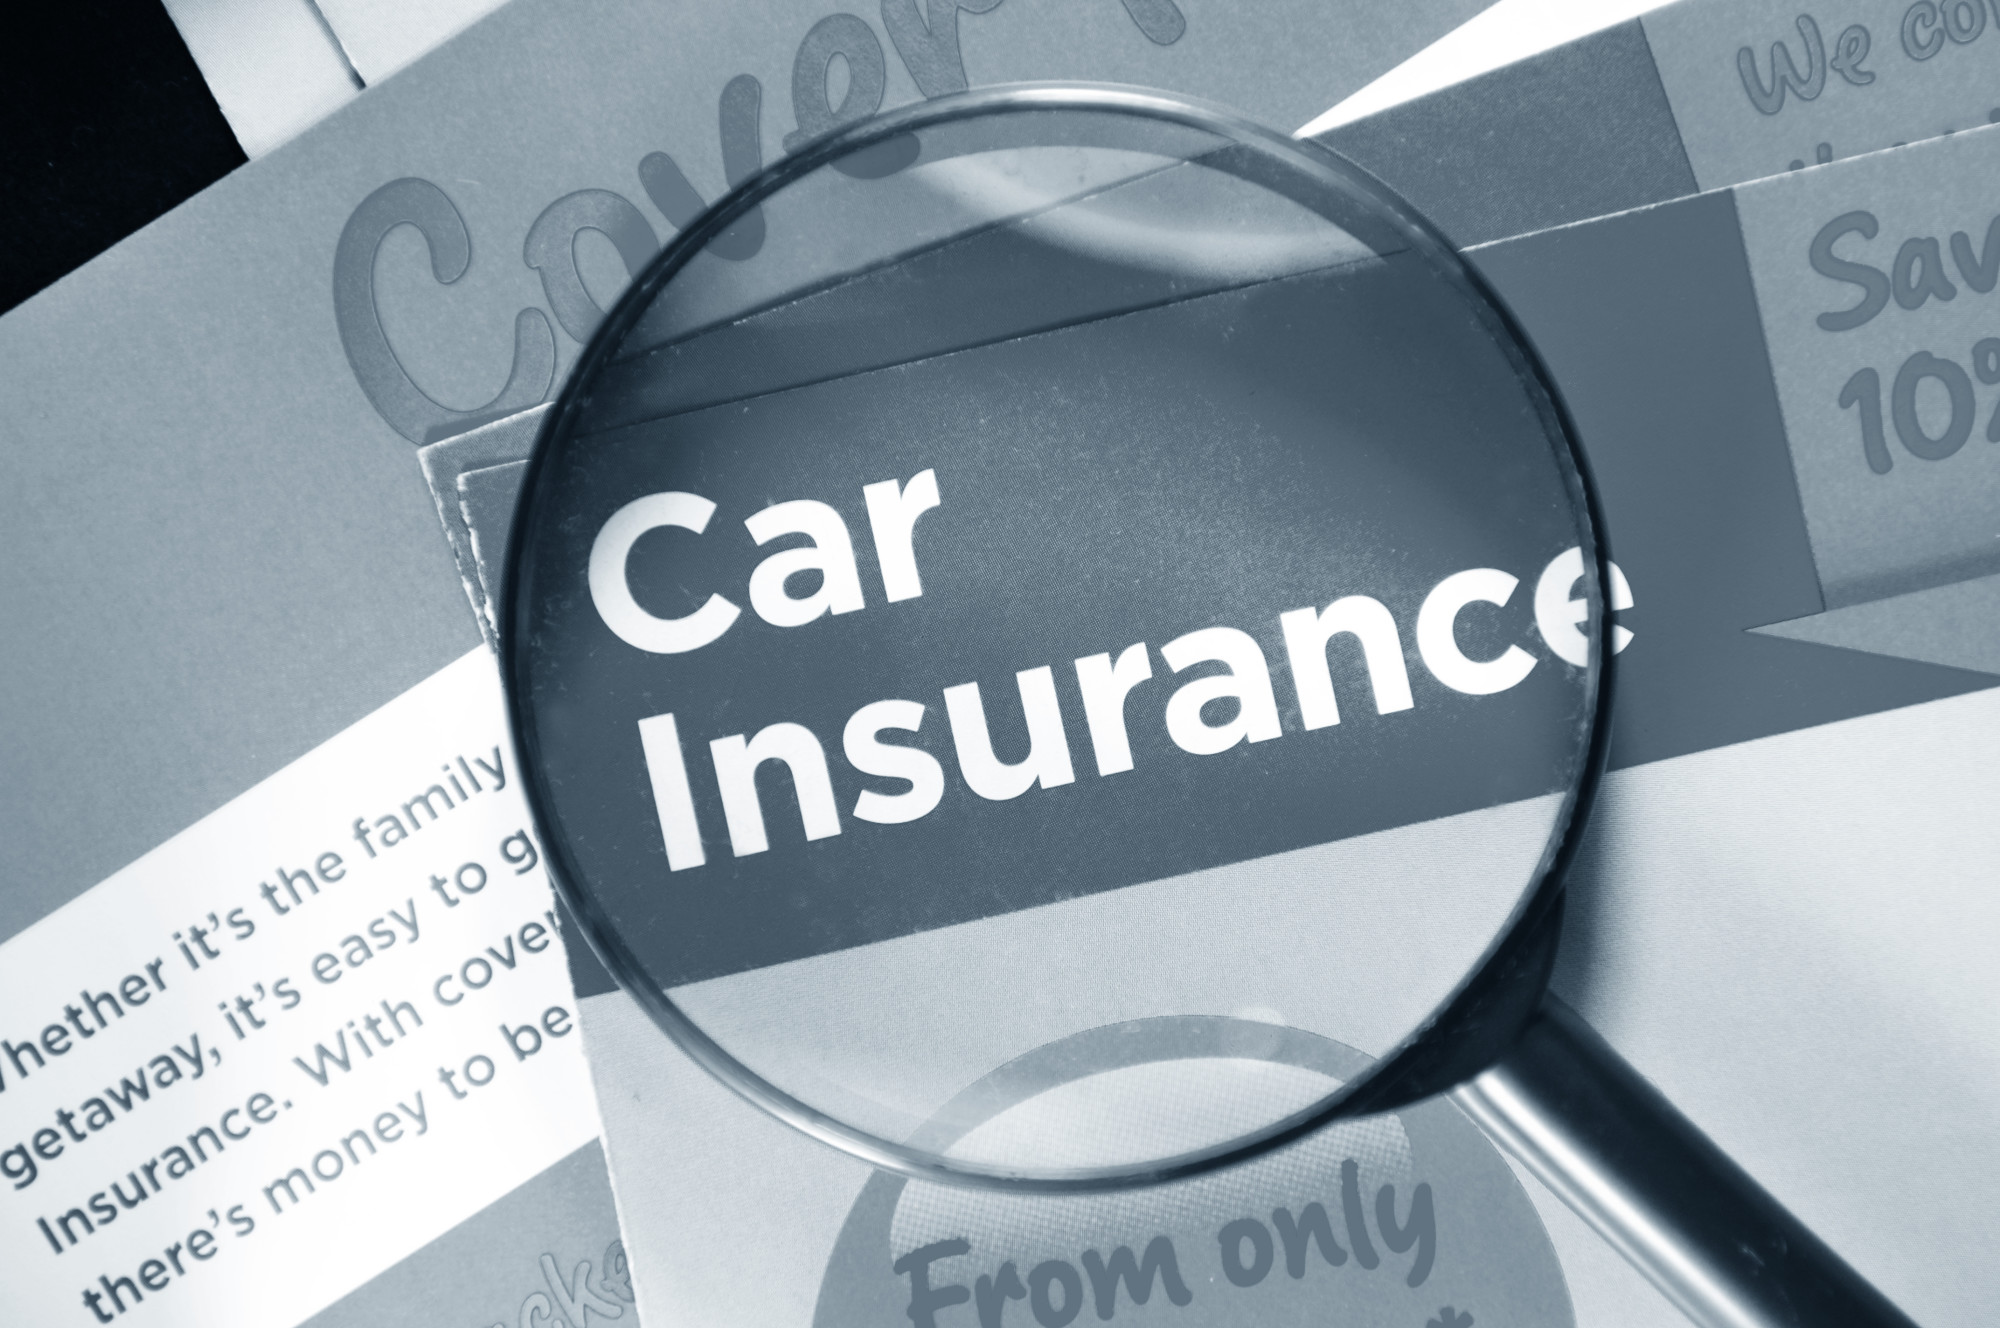 What Does Your Car Insurance Cover?